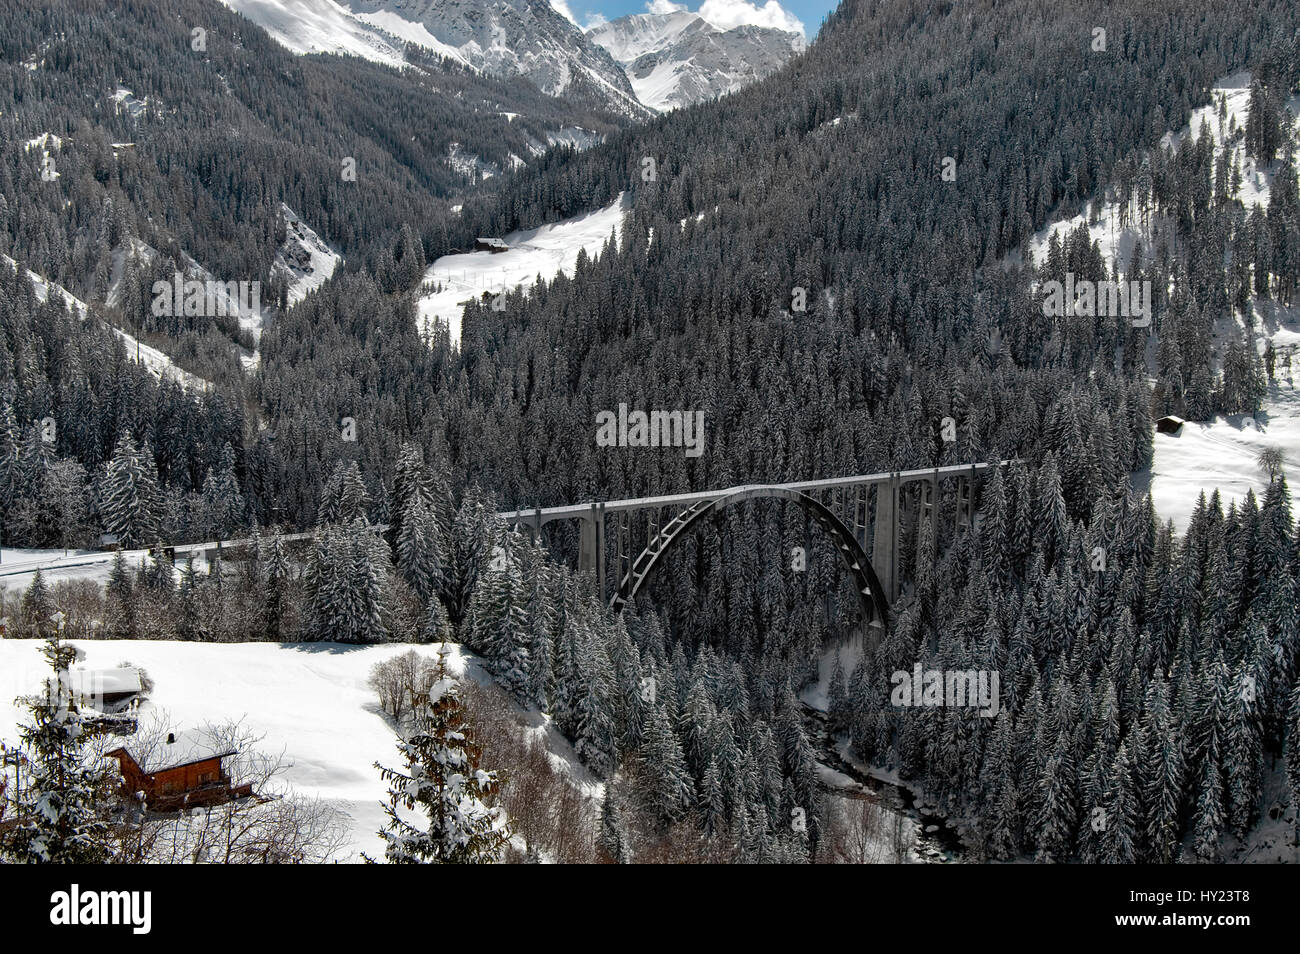 Langwies Viaduct Bridge in a beautiful mountain landscape near Arosa a ski resort in Switzerland. The image was taken on a sunny late winter afternoon Stock Photo